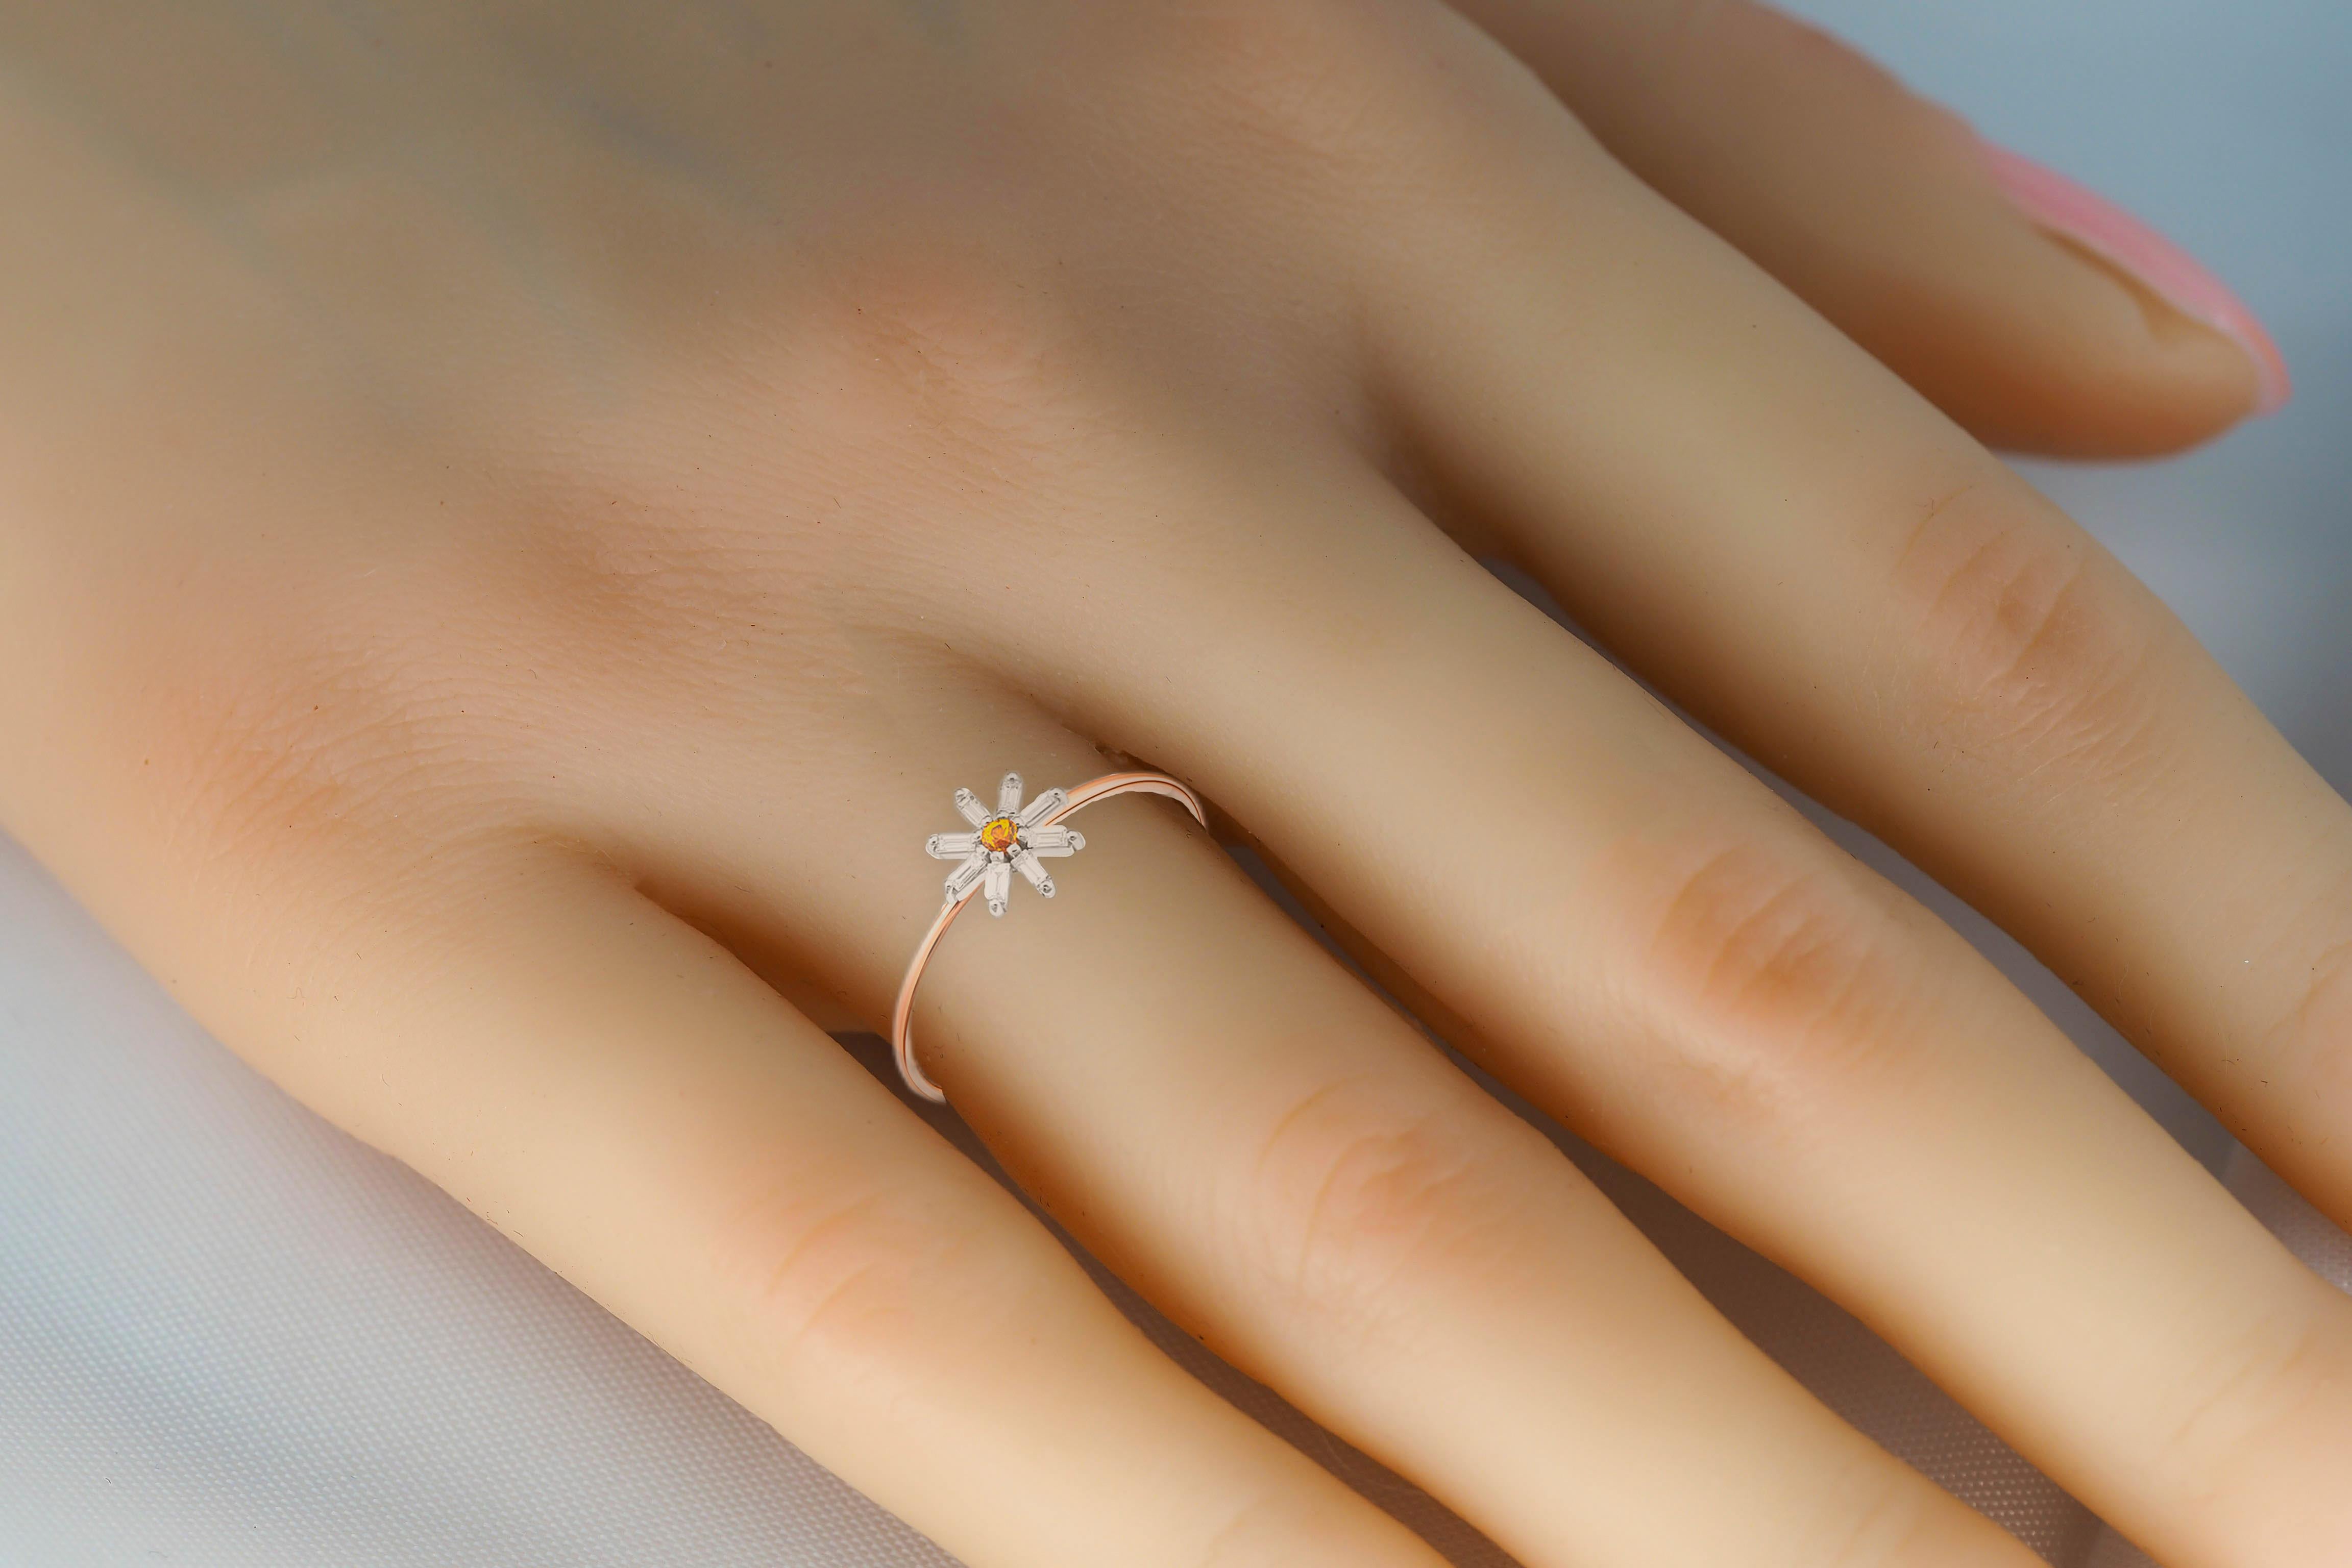 14k Gold Flower Wedding Ring. Cute Daisy Stackable Gold Ring. Solid Gold Floral Band Ring. Baguette Moissanite and Yellow sapphire Stackable Band. Elegant Flower Engagement Ring.

Metal: 14k gold
Weight: 1.5 gr depends from size
Moissanites: 8